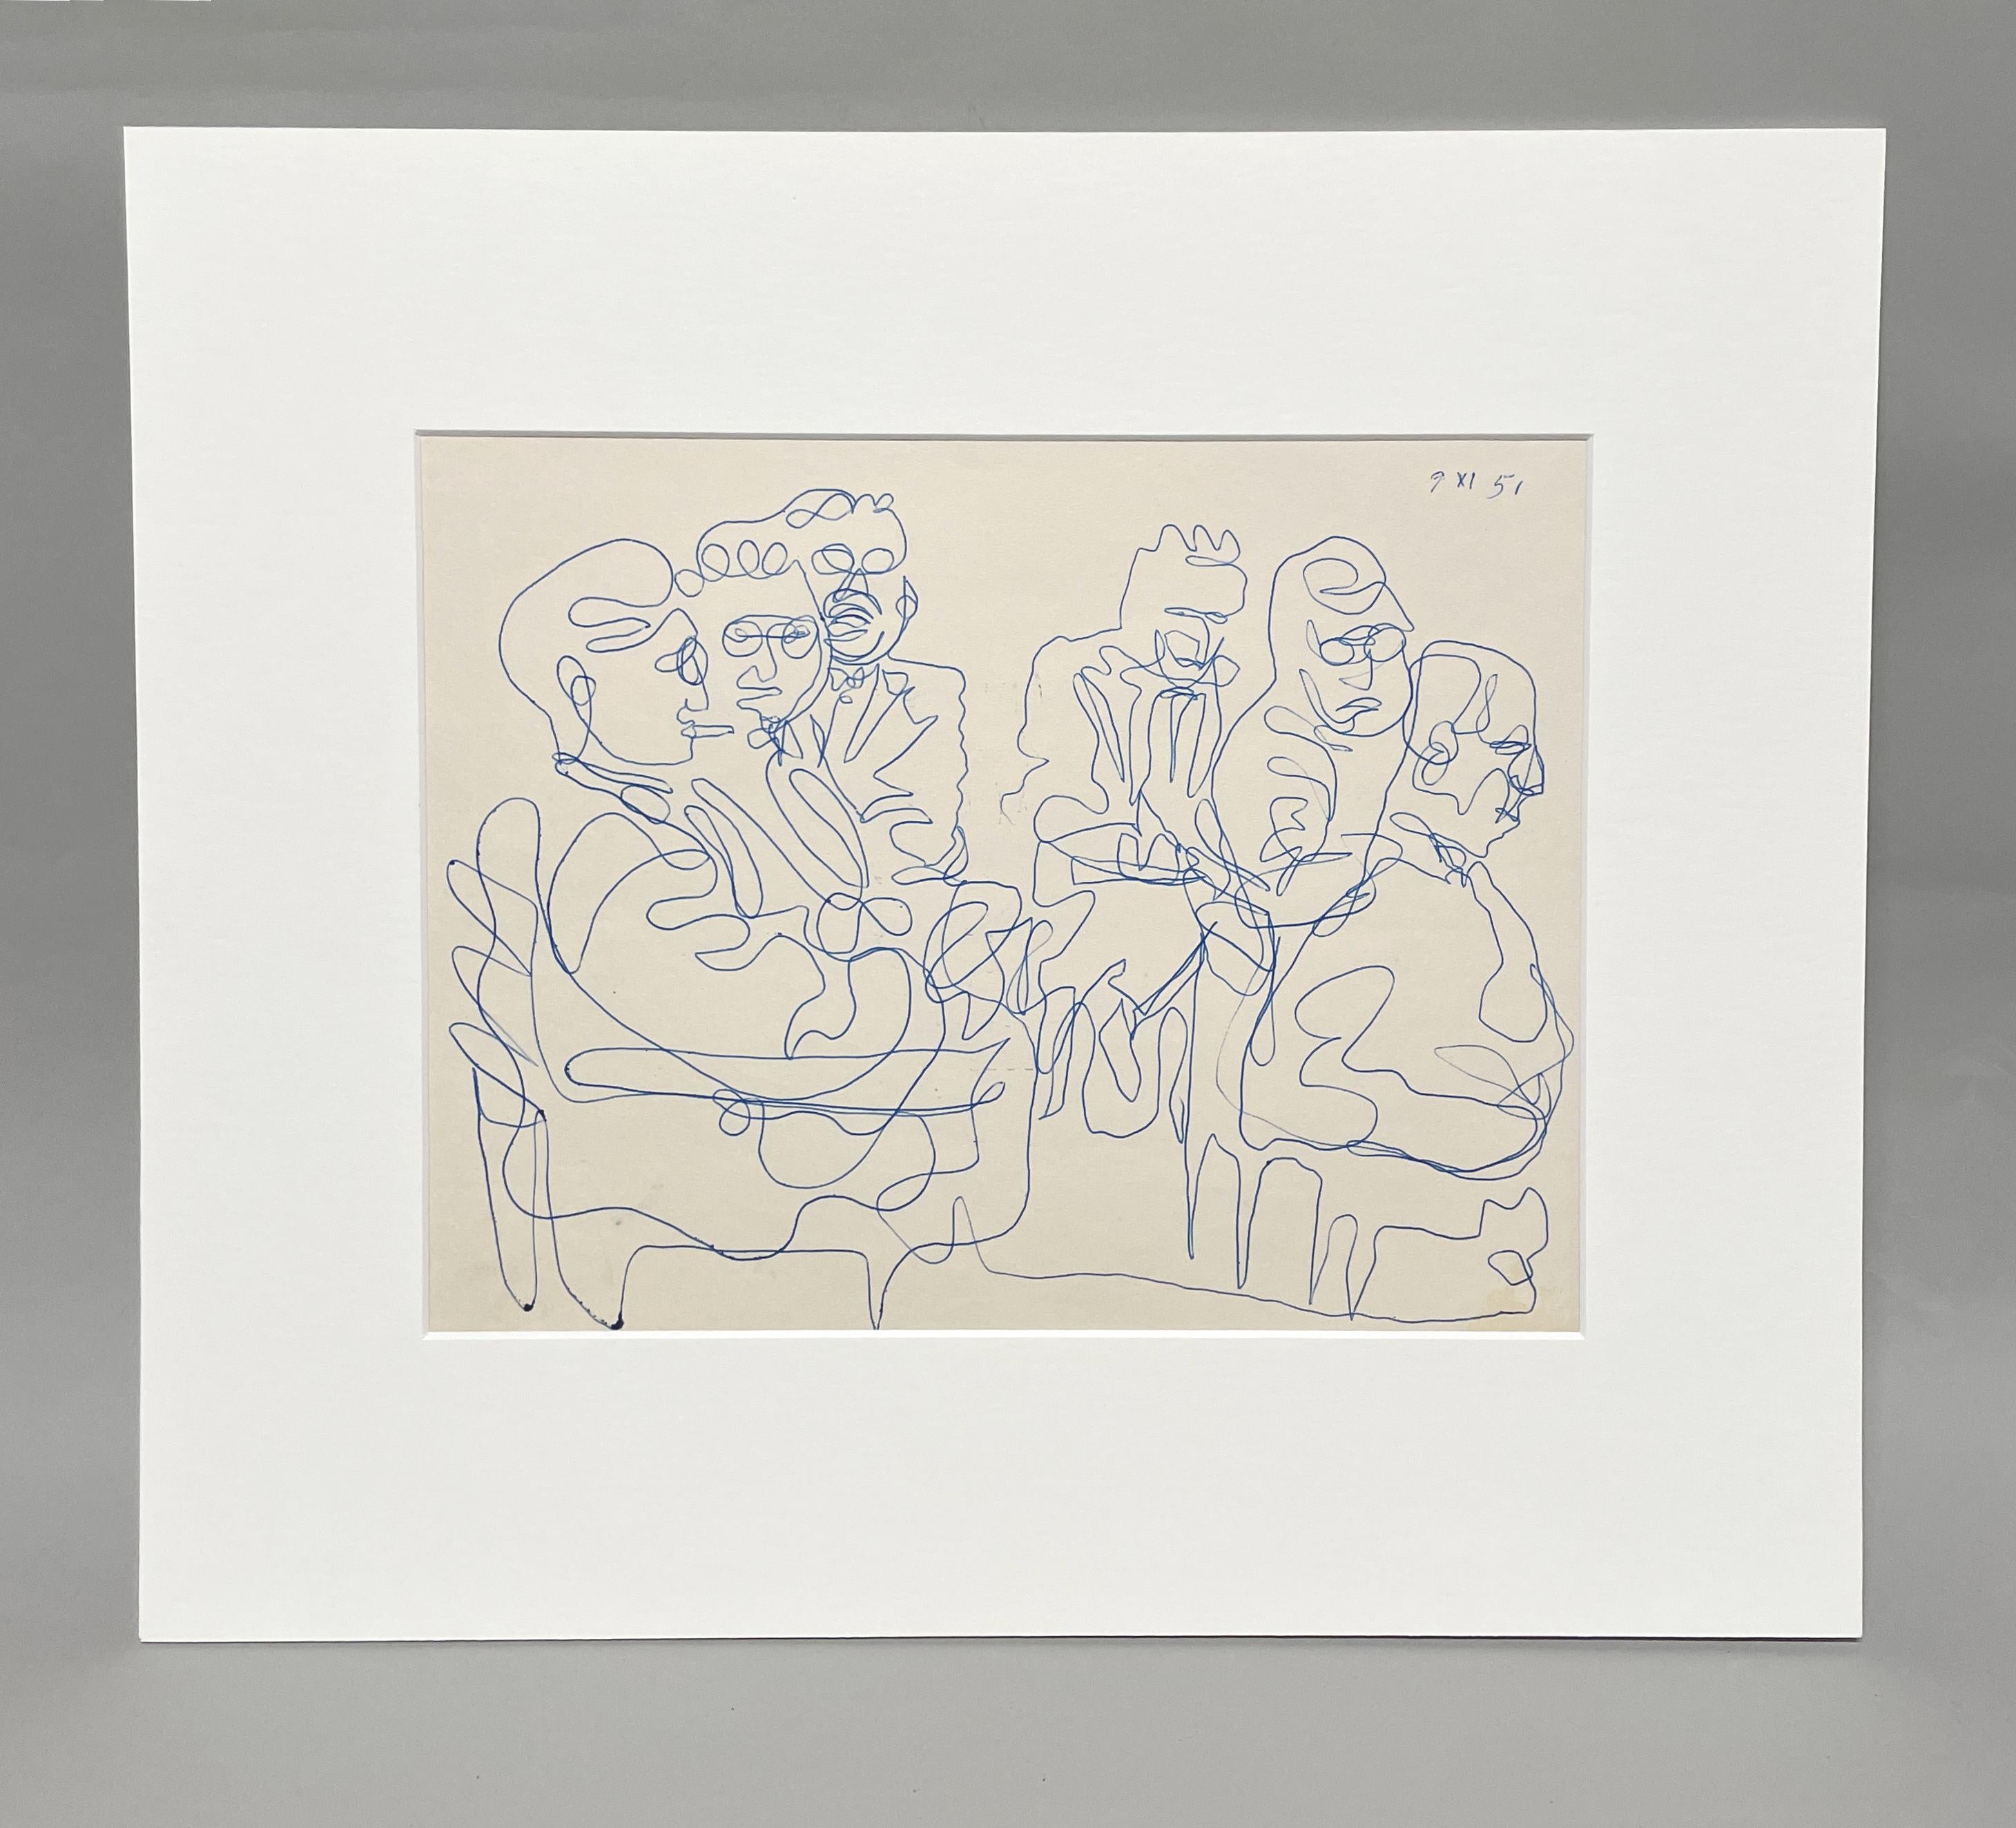 A ink on paper figure study by artist Harold Haydon depicting a conversation.

Harold Emerson Haydon was born in Fort William, Ontario, Canada in 1909.   Haydon came to Chicago with his family in 1917 and became a naturalized American citizen in